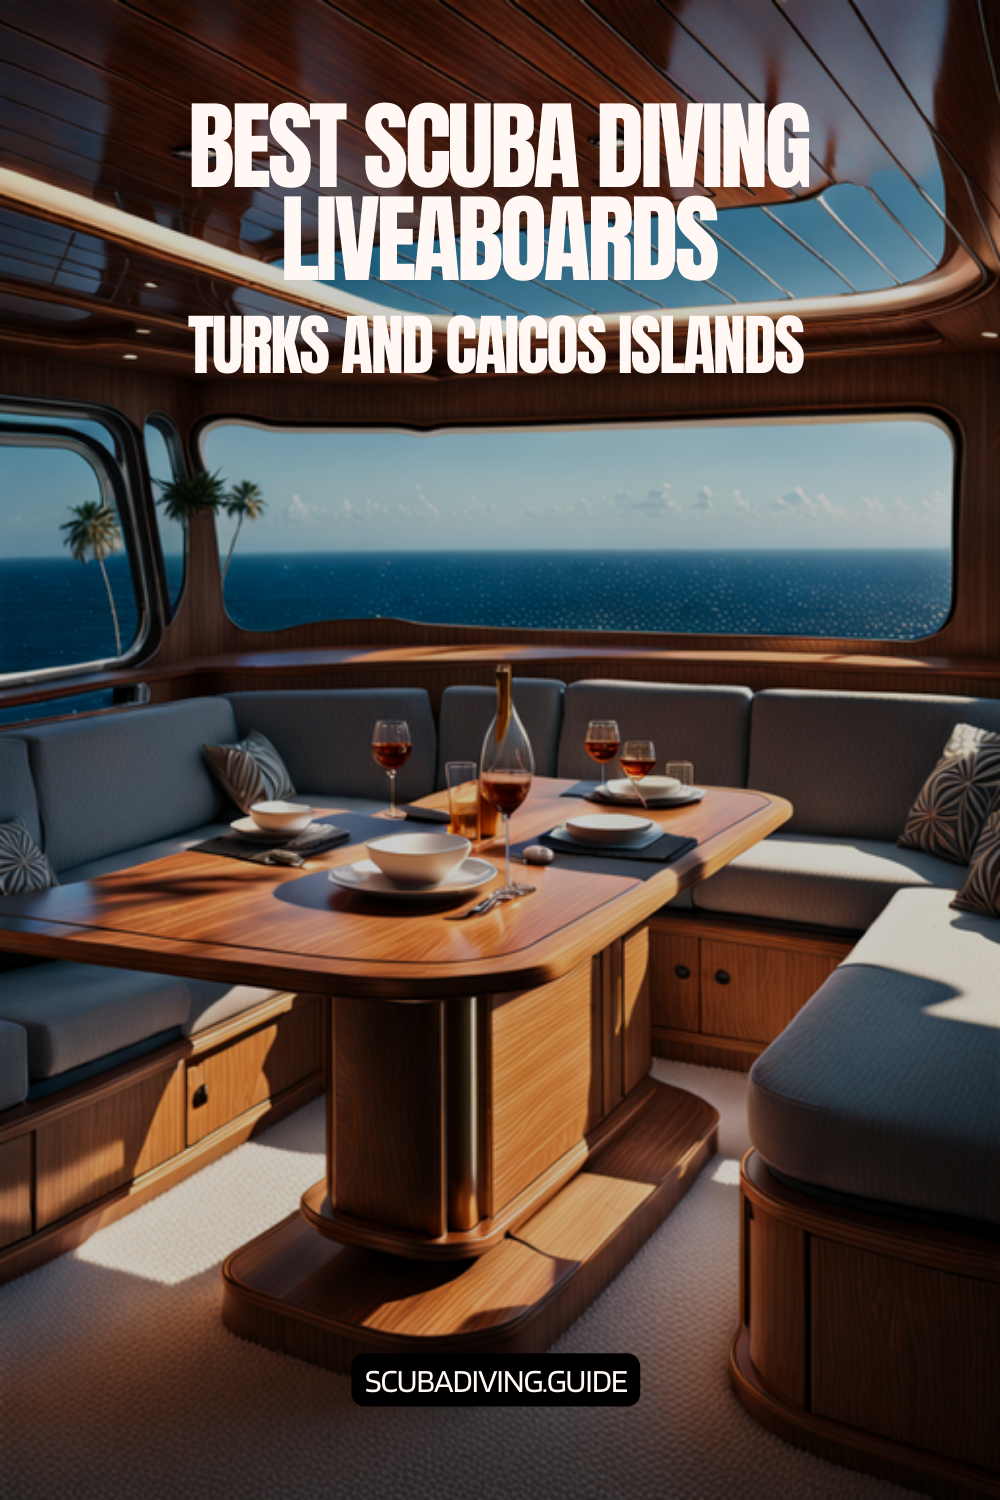 Turks And Caicos Islands Liveaboards